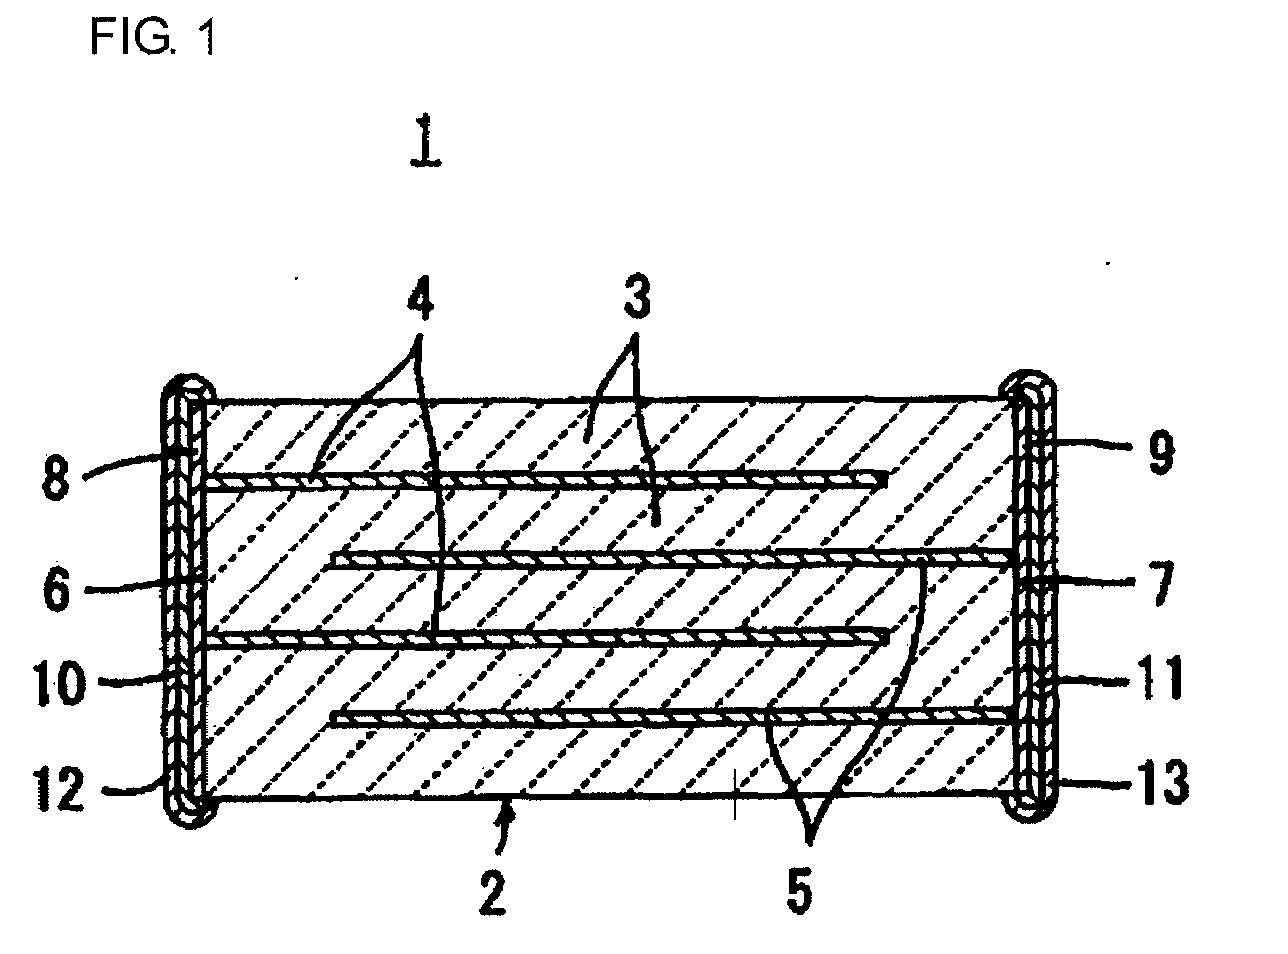 Dielectric ceramic and multilayer ceramic capacitor using the same